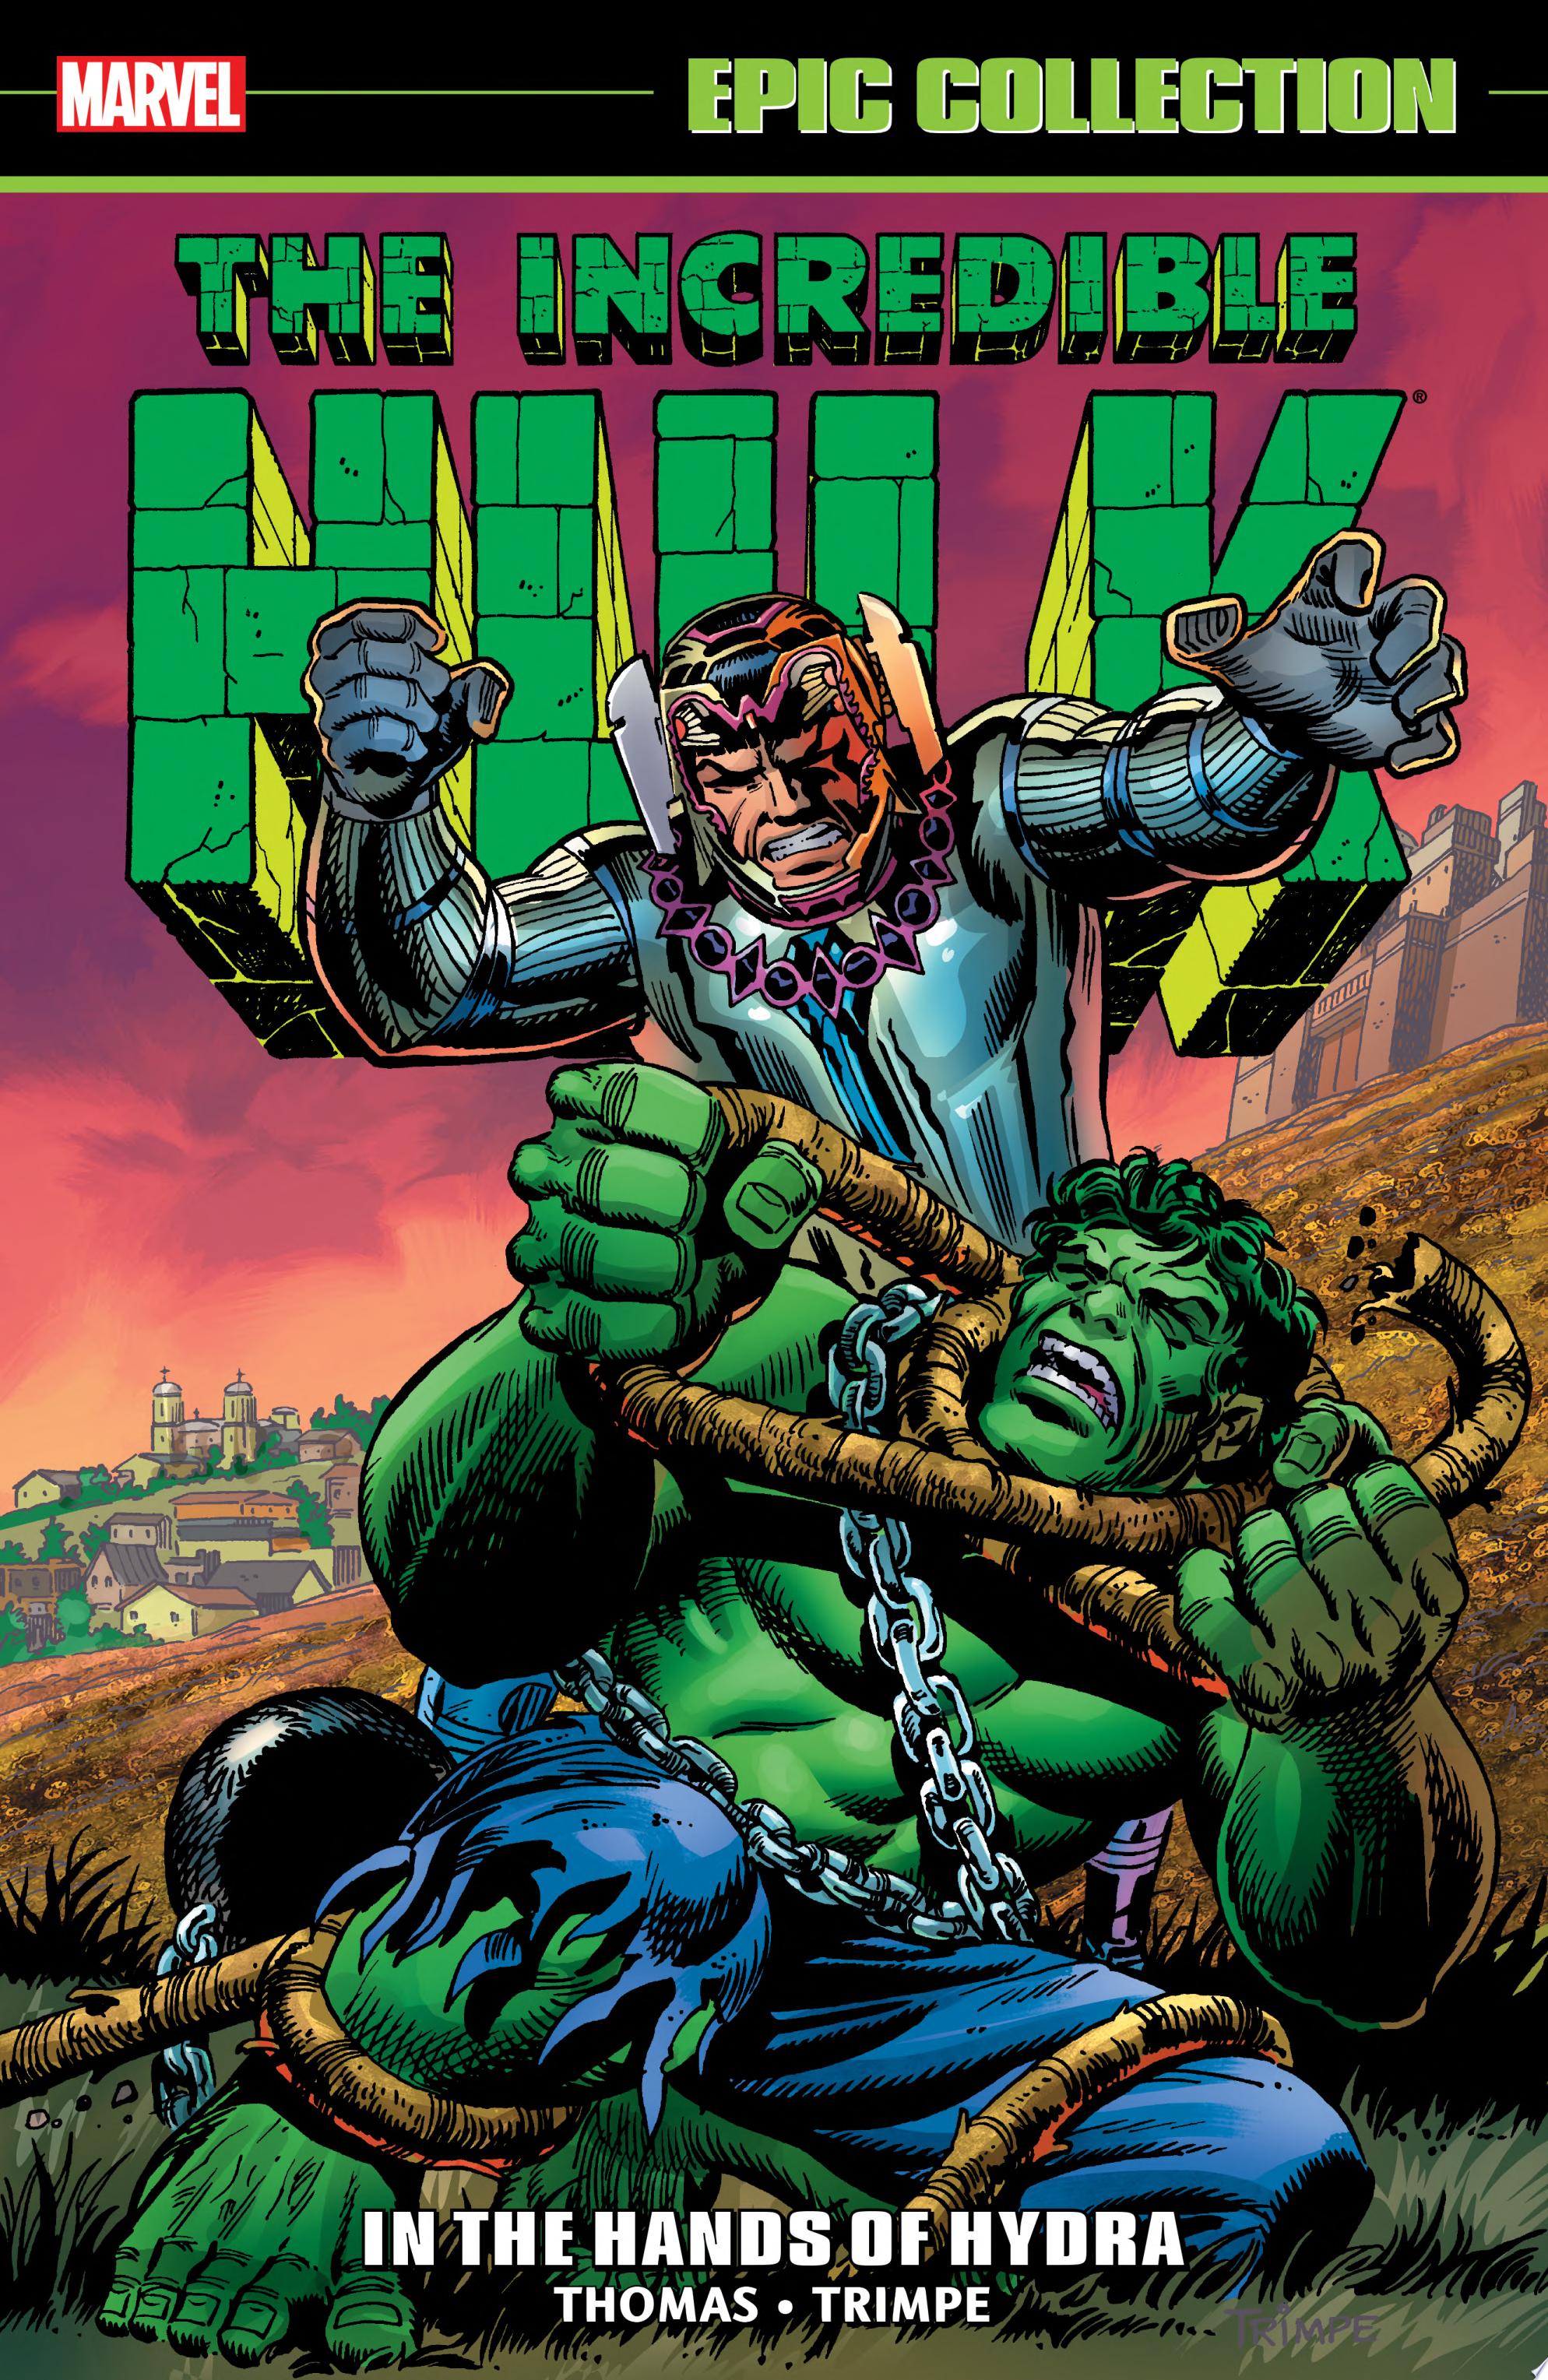 Image for "Incredible Hulk Epic Collection"